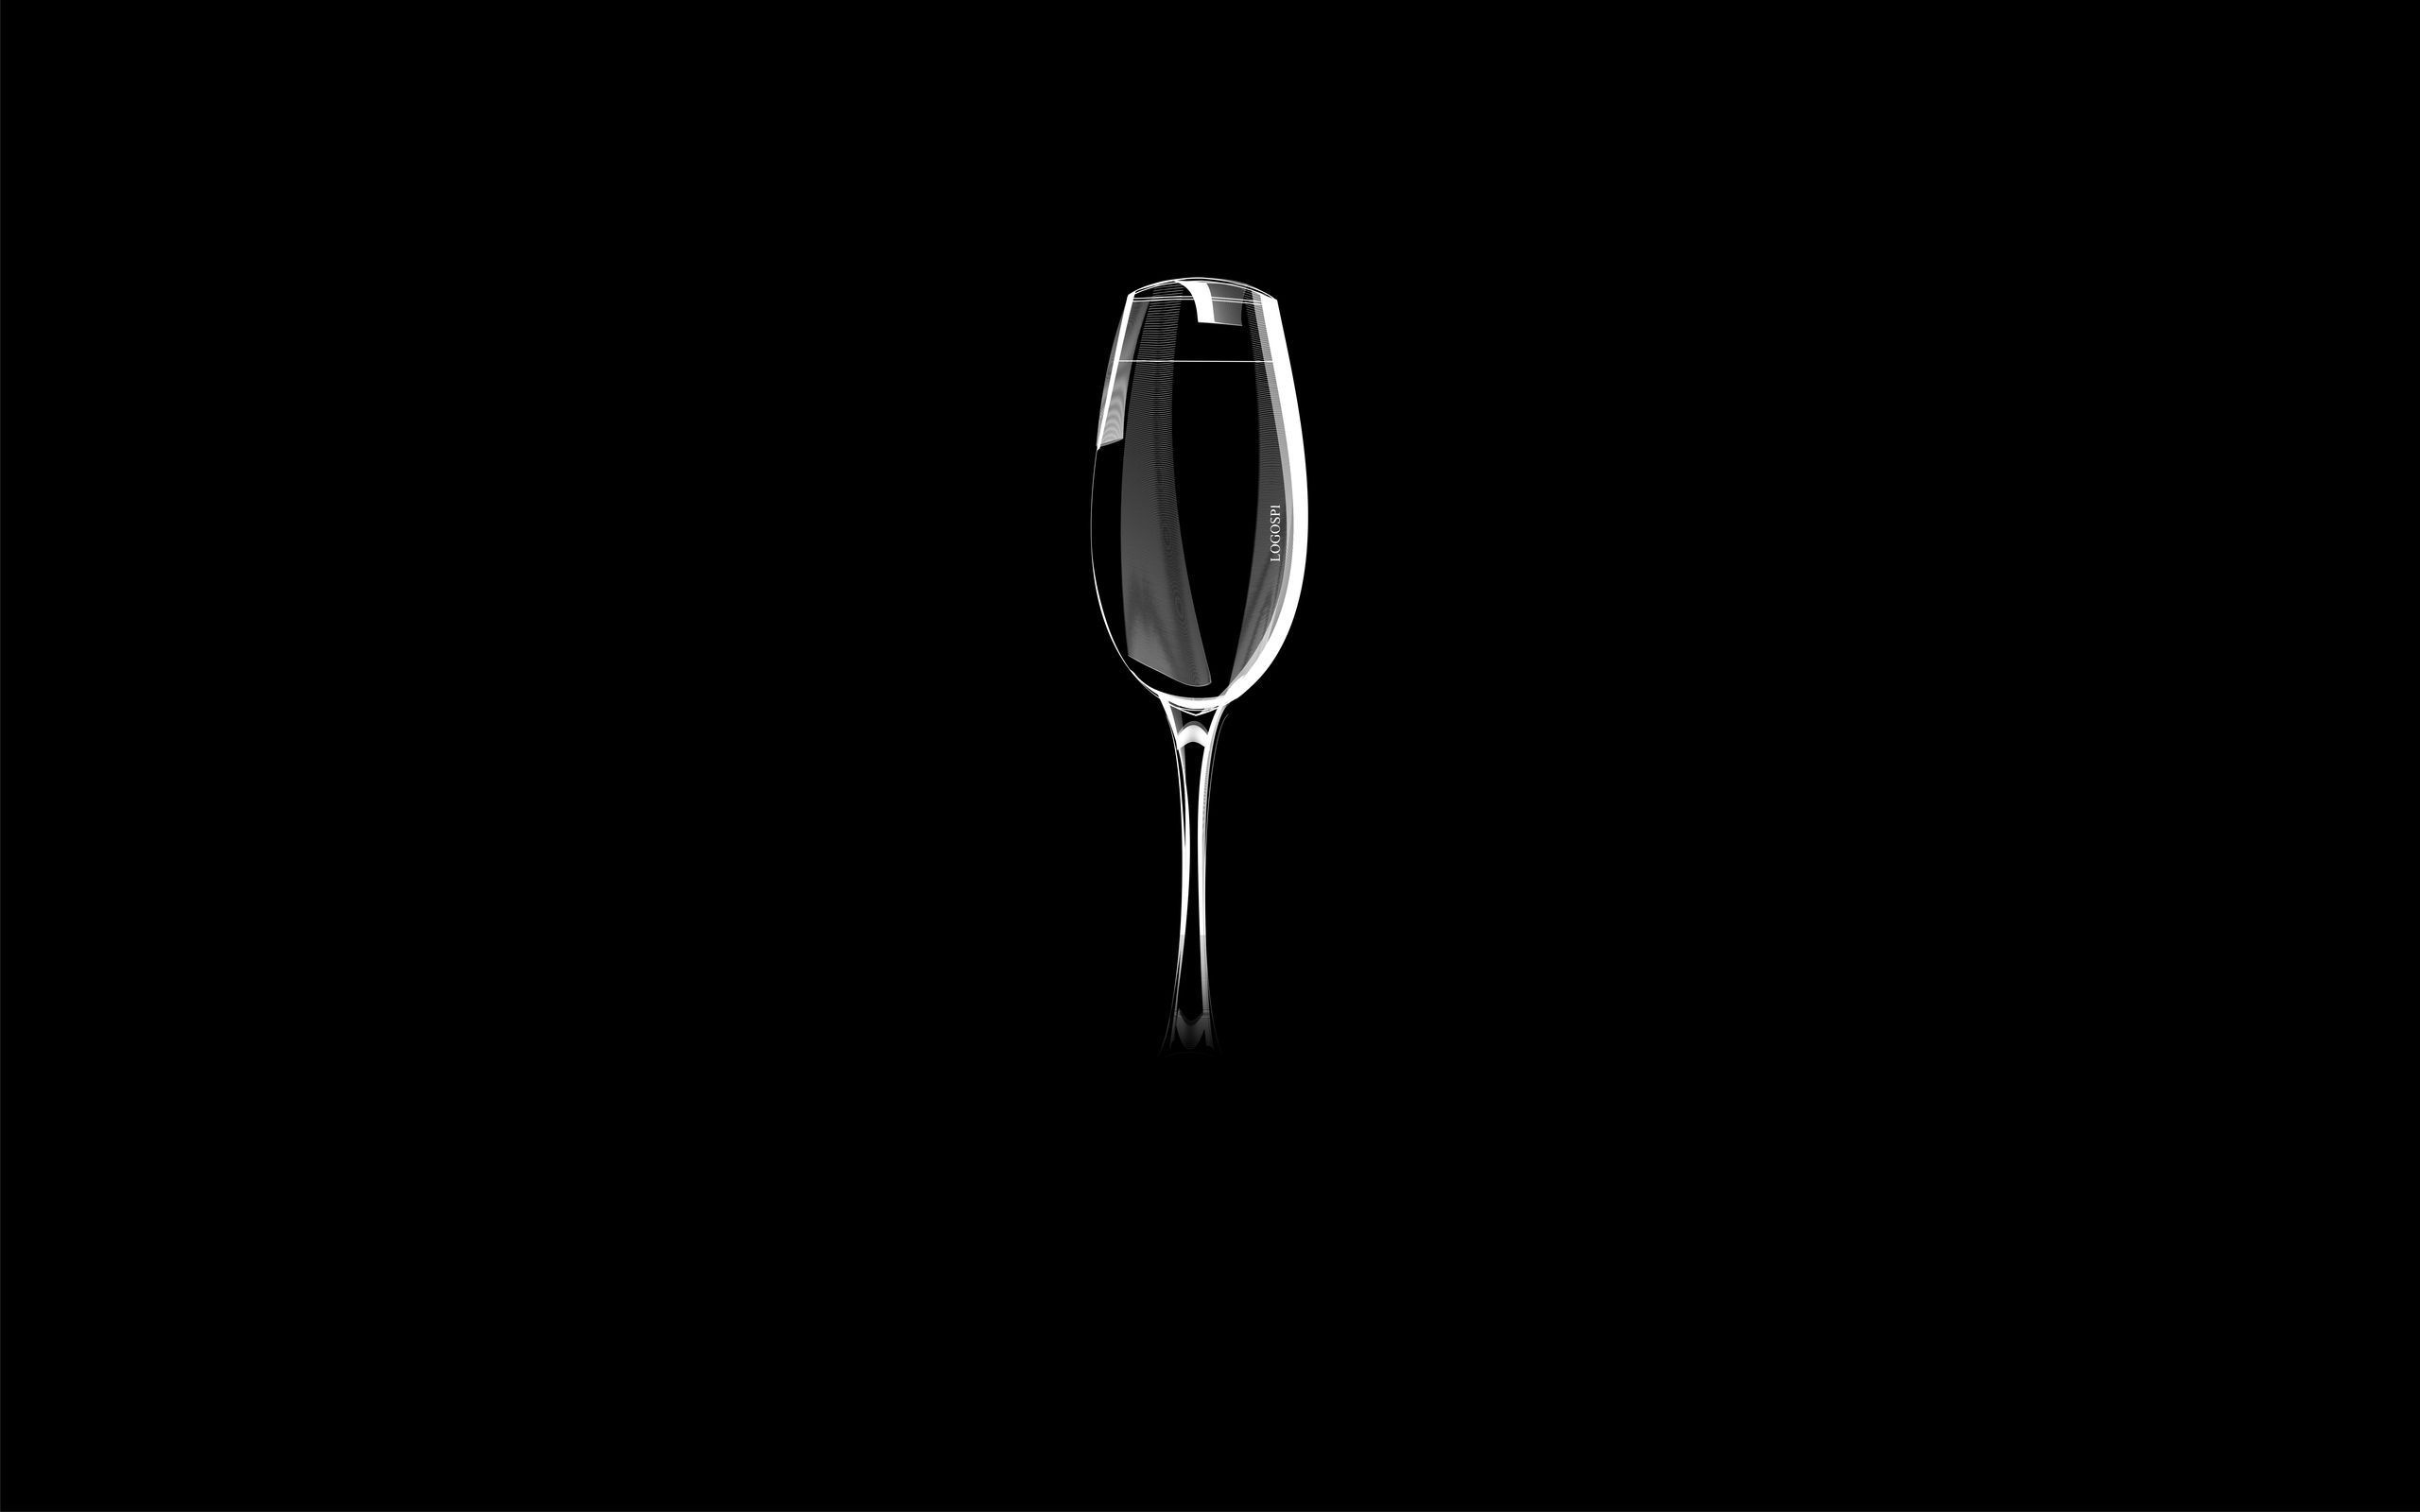 CHAMPAGNE wallpapers | CHAMPAGNE stock photos